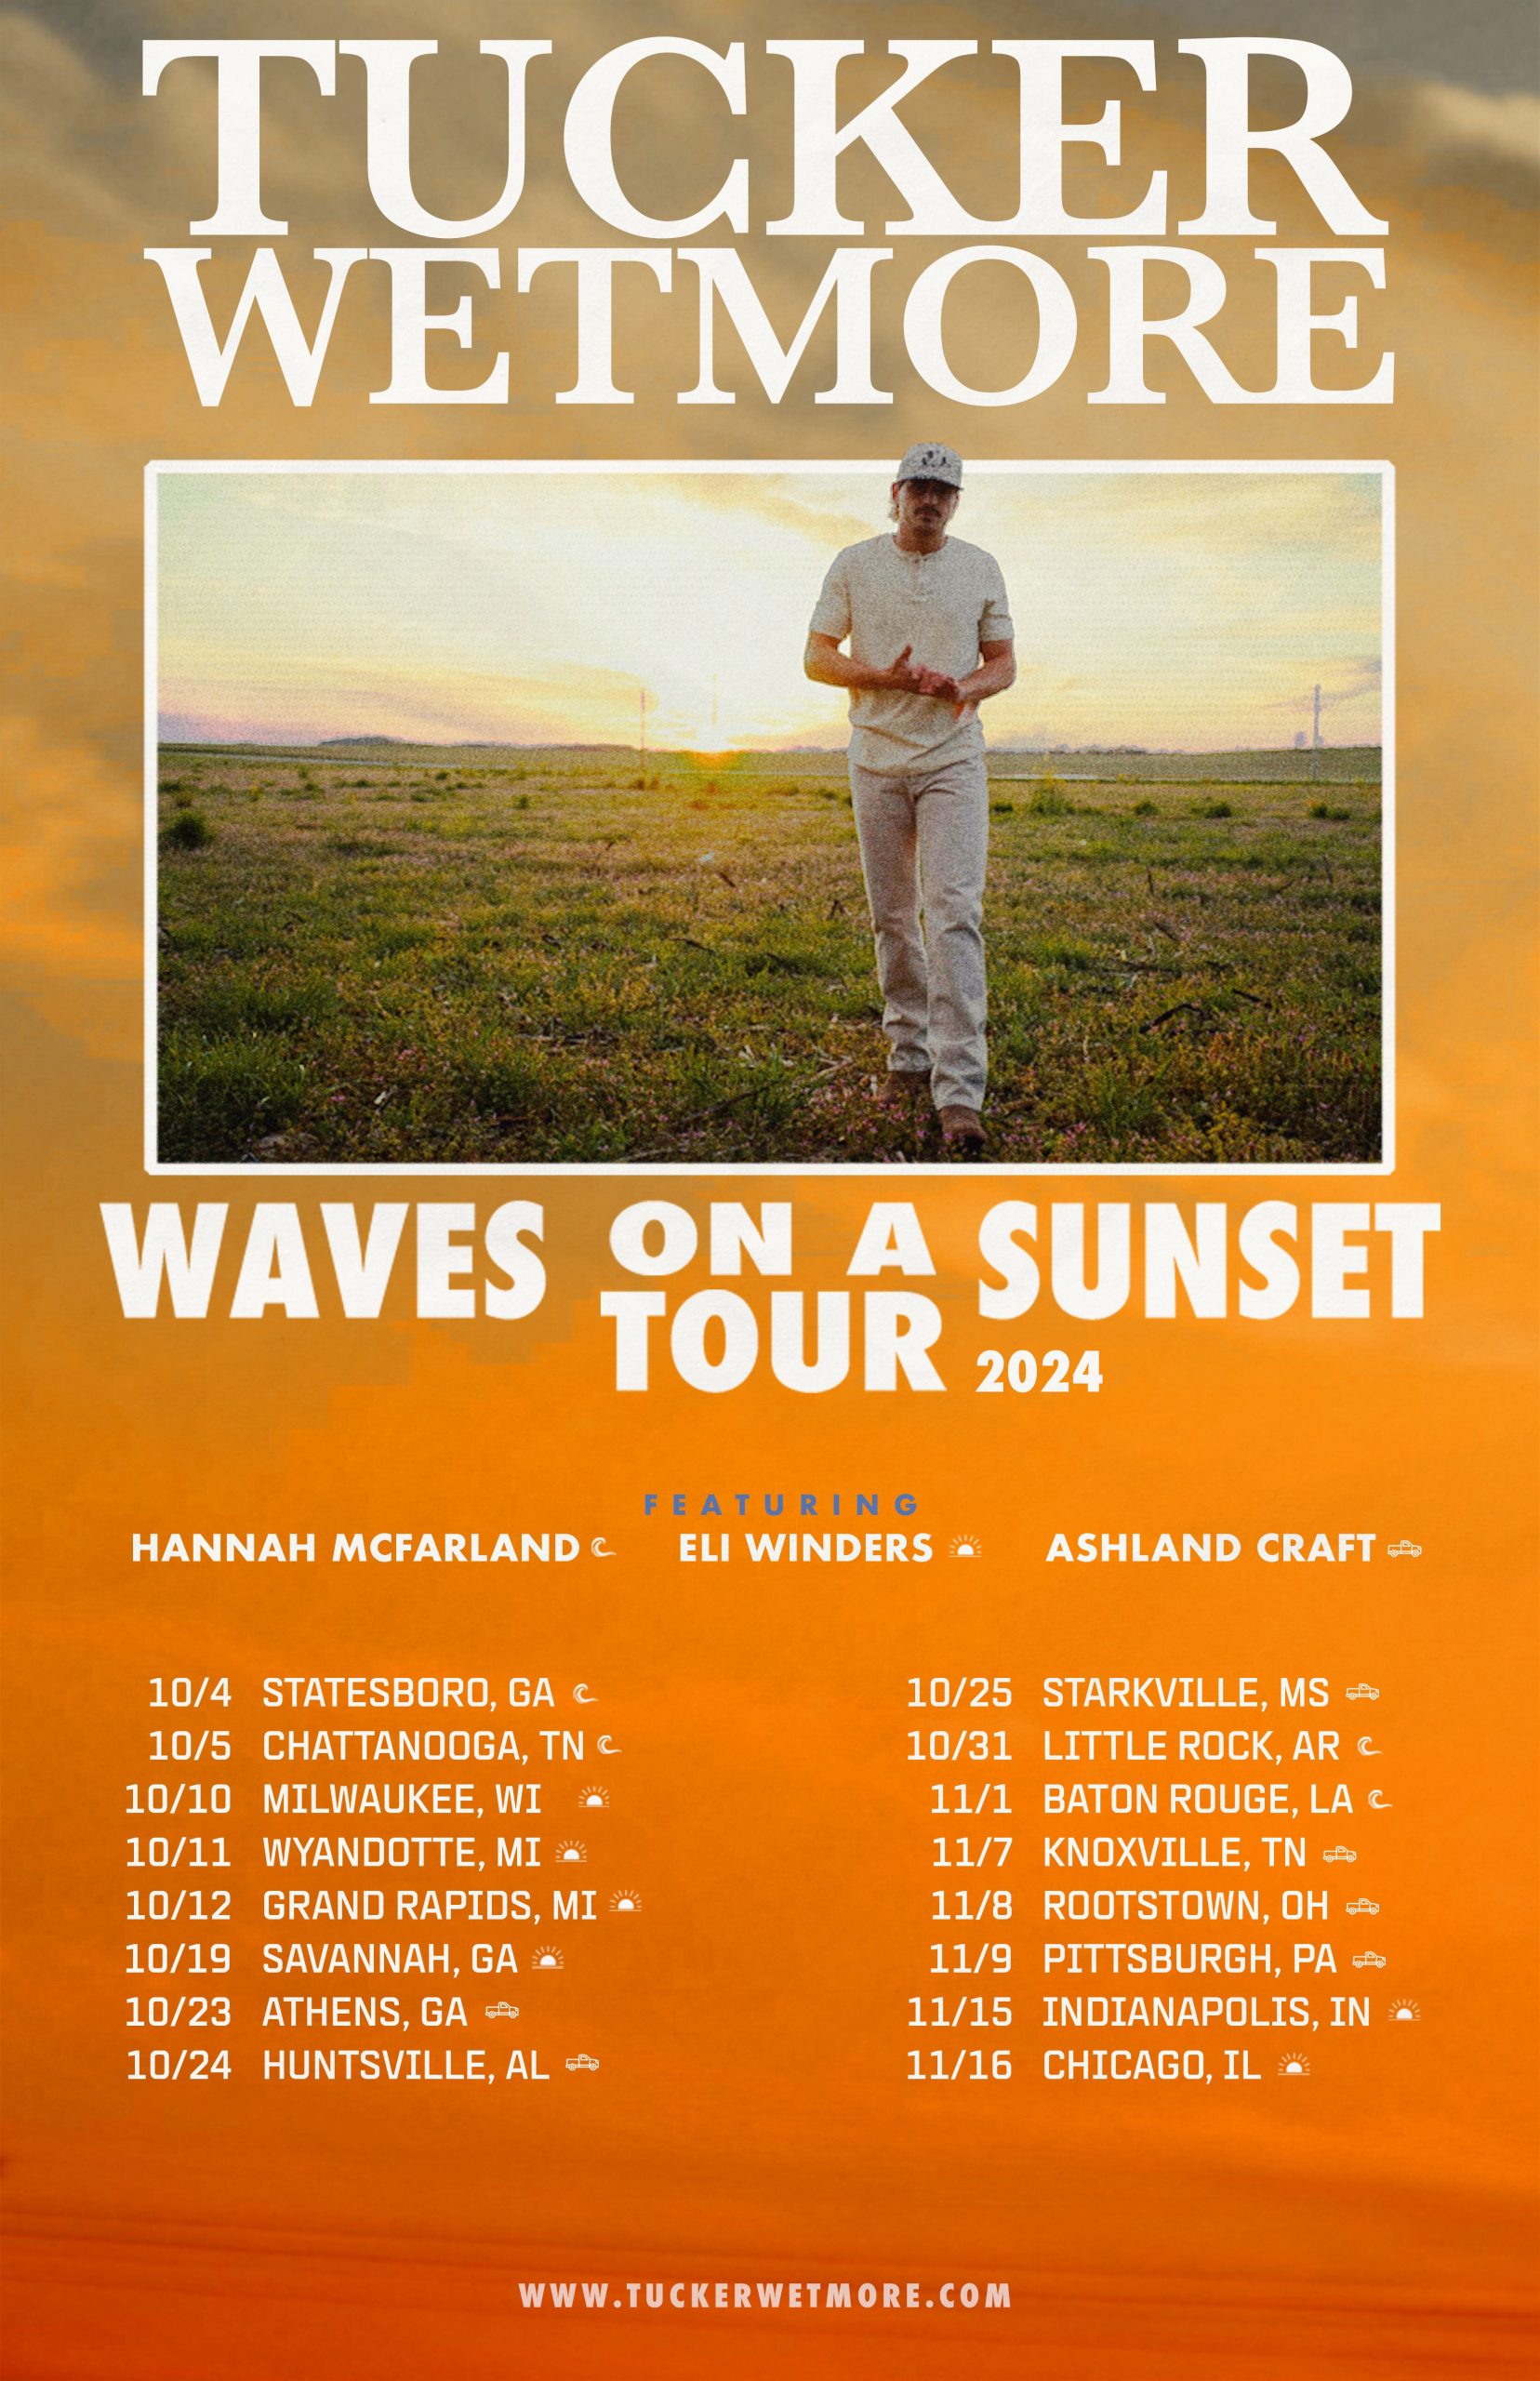 TUCKER WETMORE ANNOUNCES HIS FIRST-EVER HEADLINING RUN, WAVES ON A SUNSET TOUR 2024